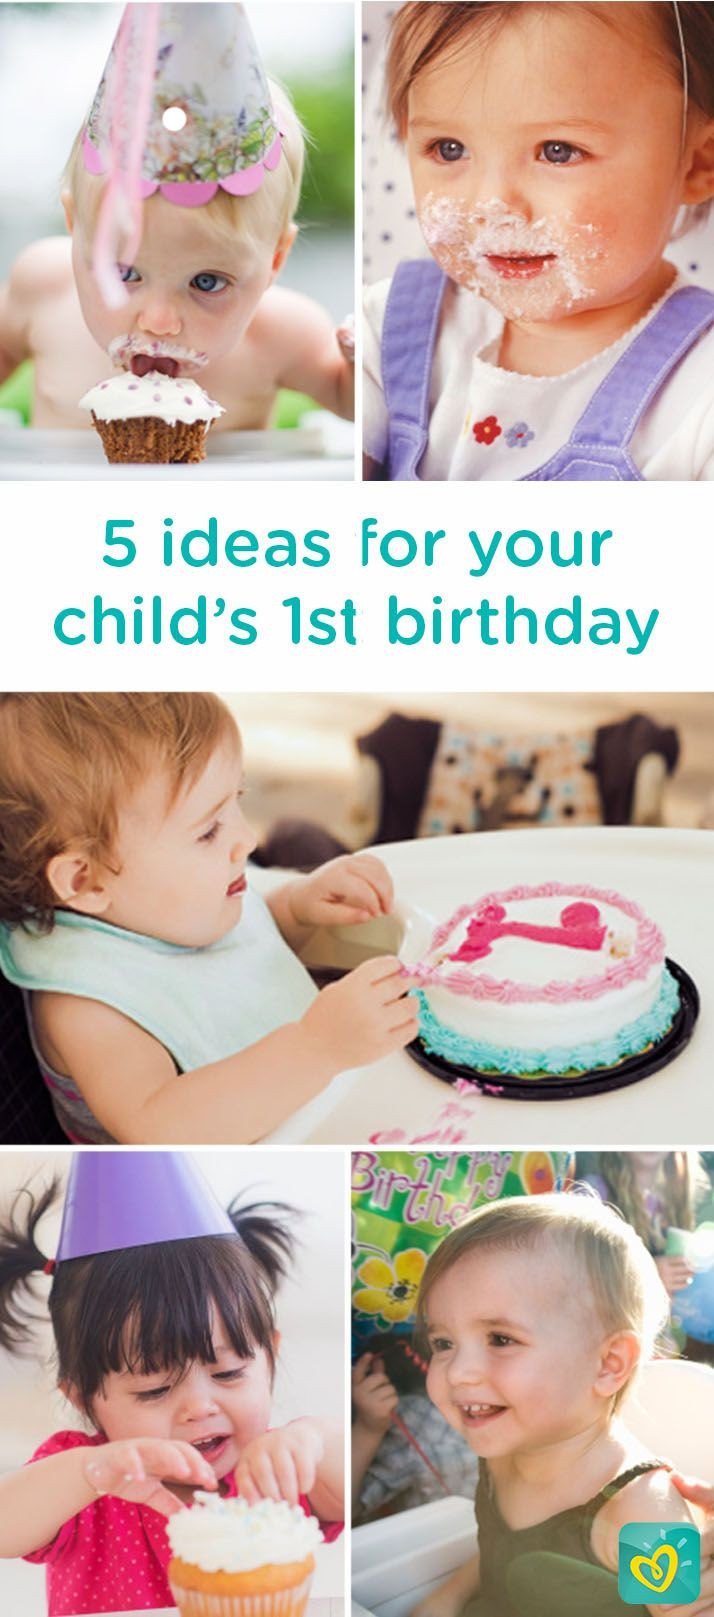 Baby'S First Birthday Gift Ideas For Her
 Stress free Birthdays Tips to Keep Kids Happy and Safe